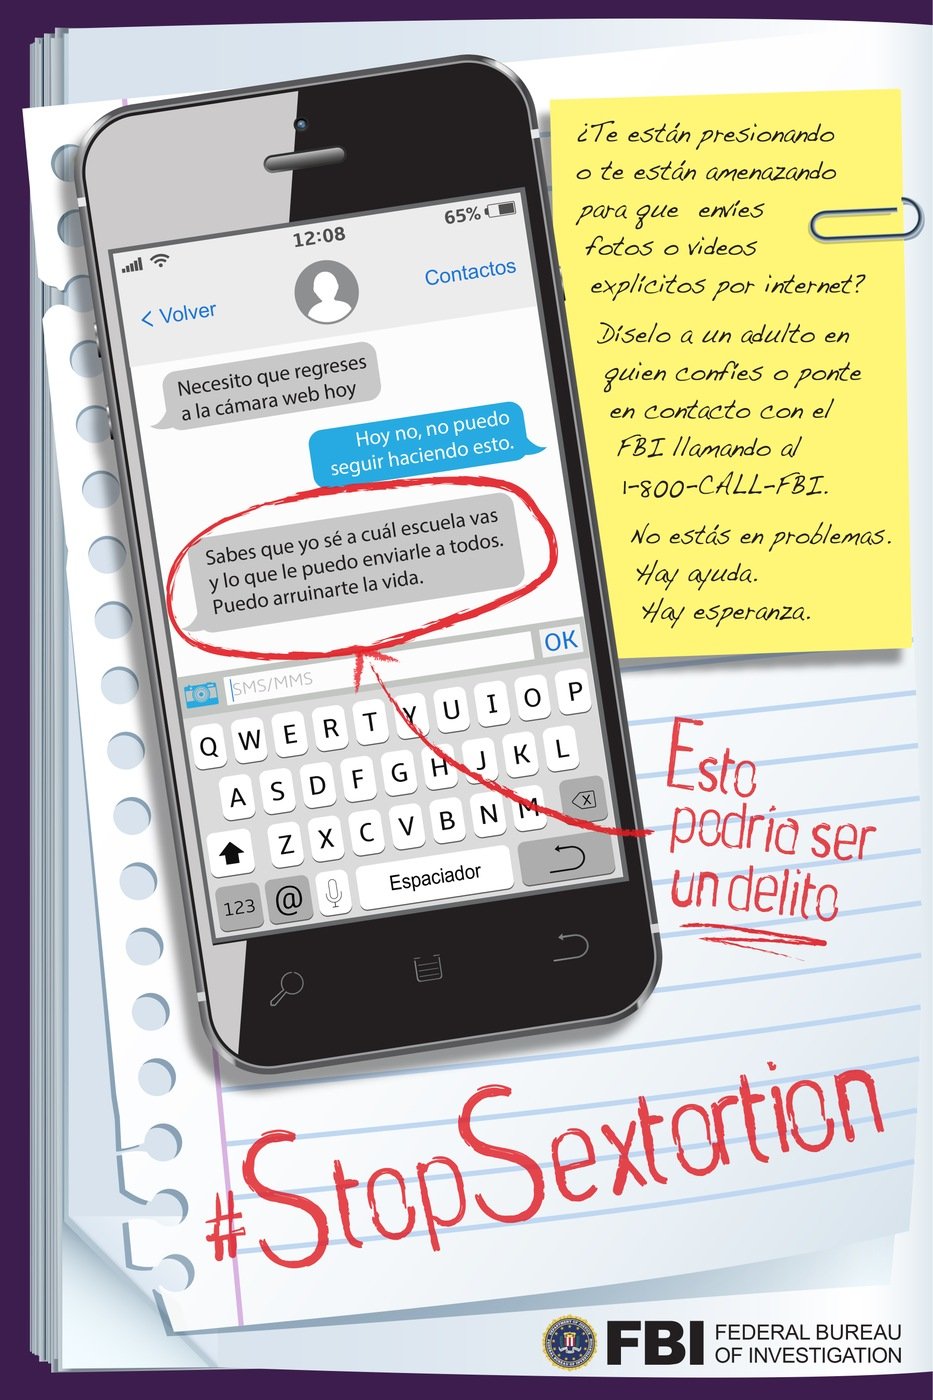 Spanish version of poster encouraging young people to report sextortion to the FBI if they are a victim.